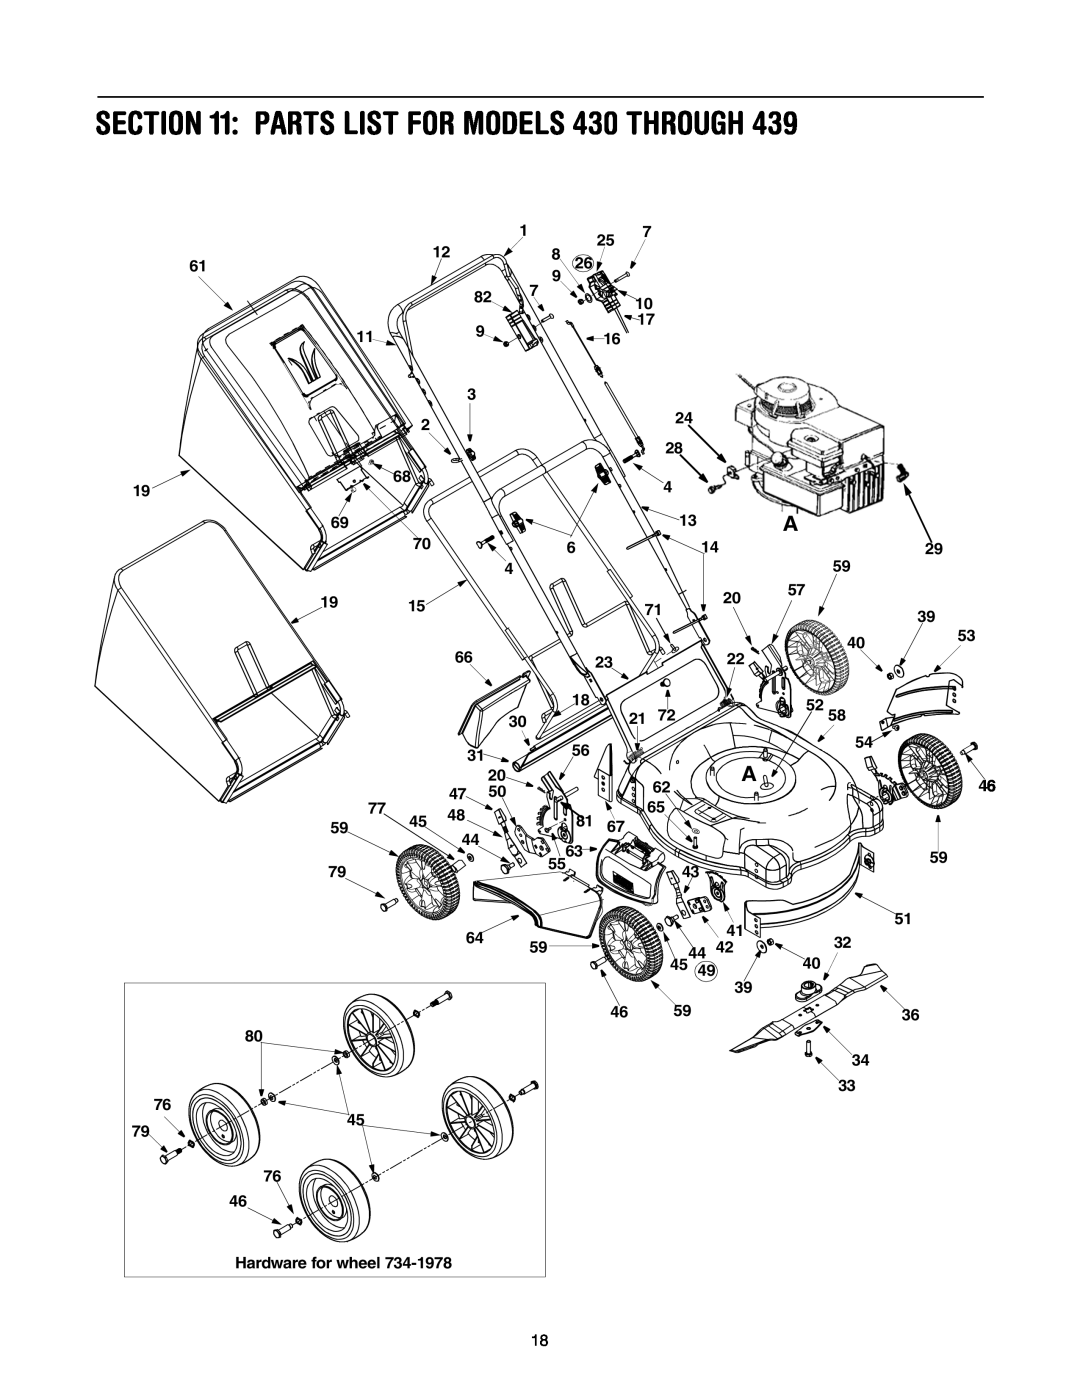 Yard Machines manual PARTS LIST FOR MODELS 430 THROUGH, Hardware for wheel 